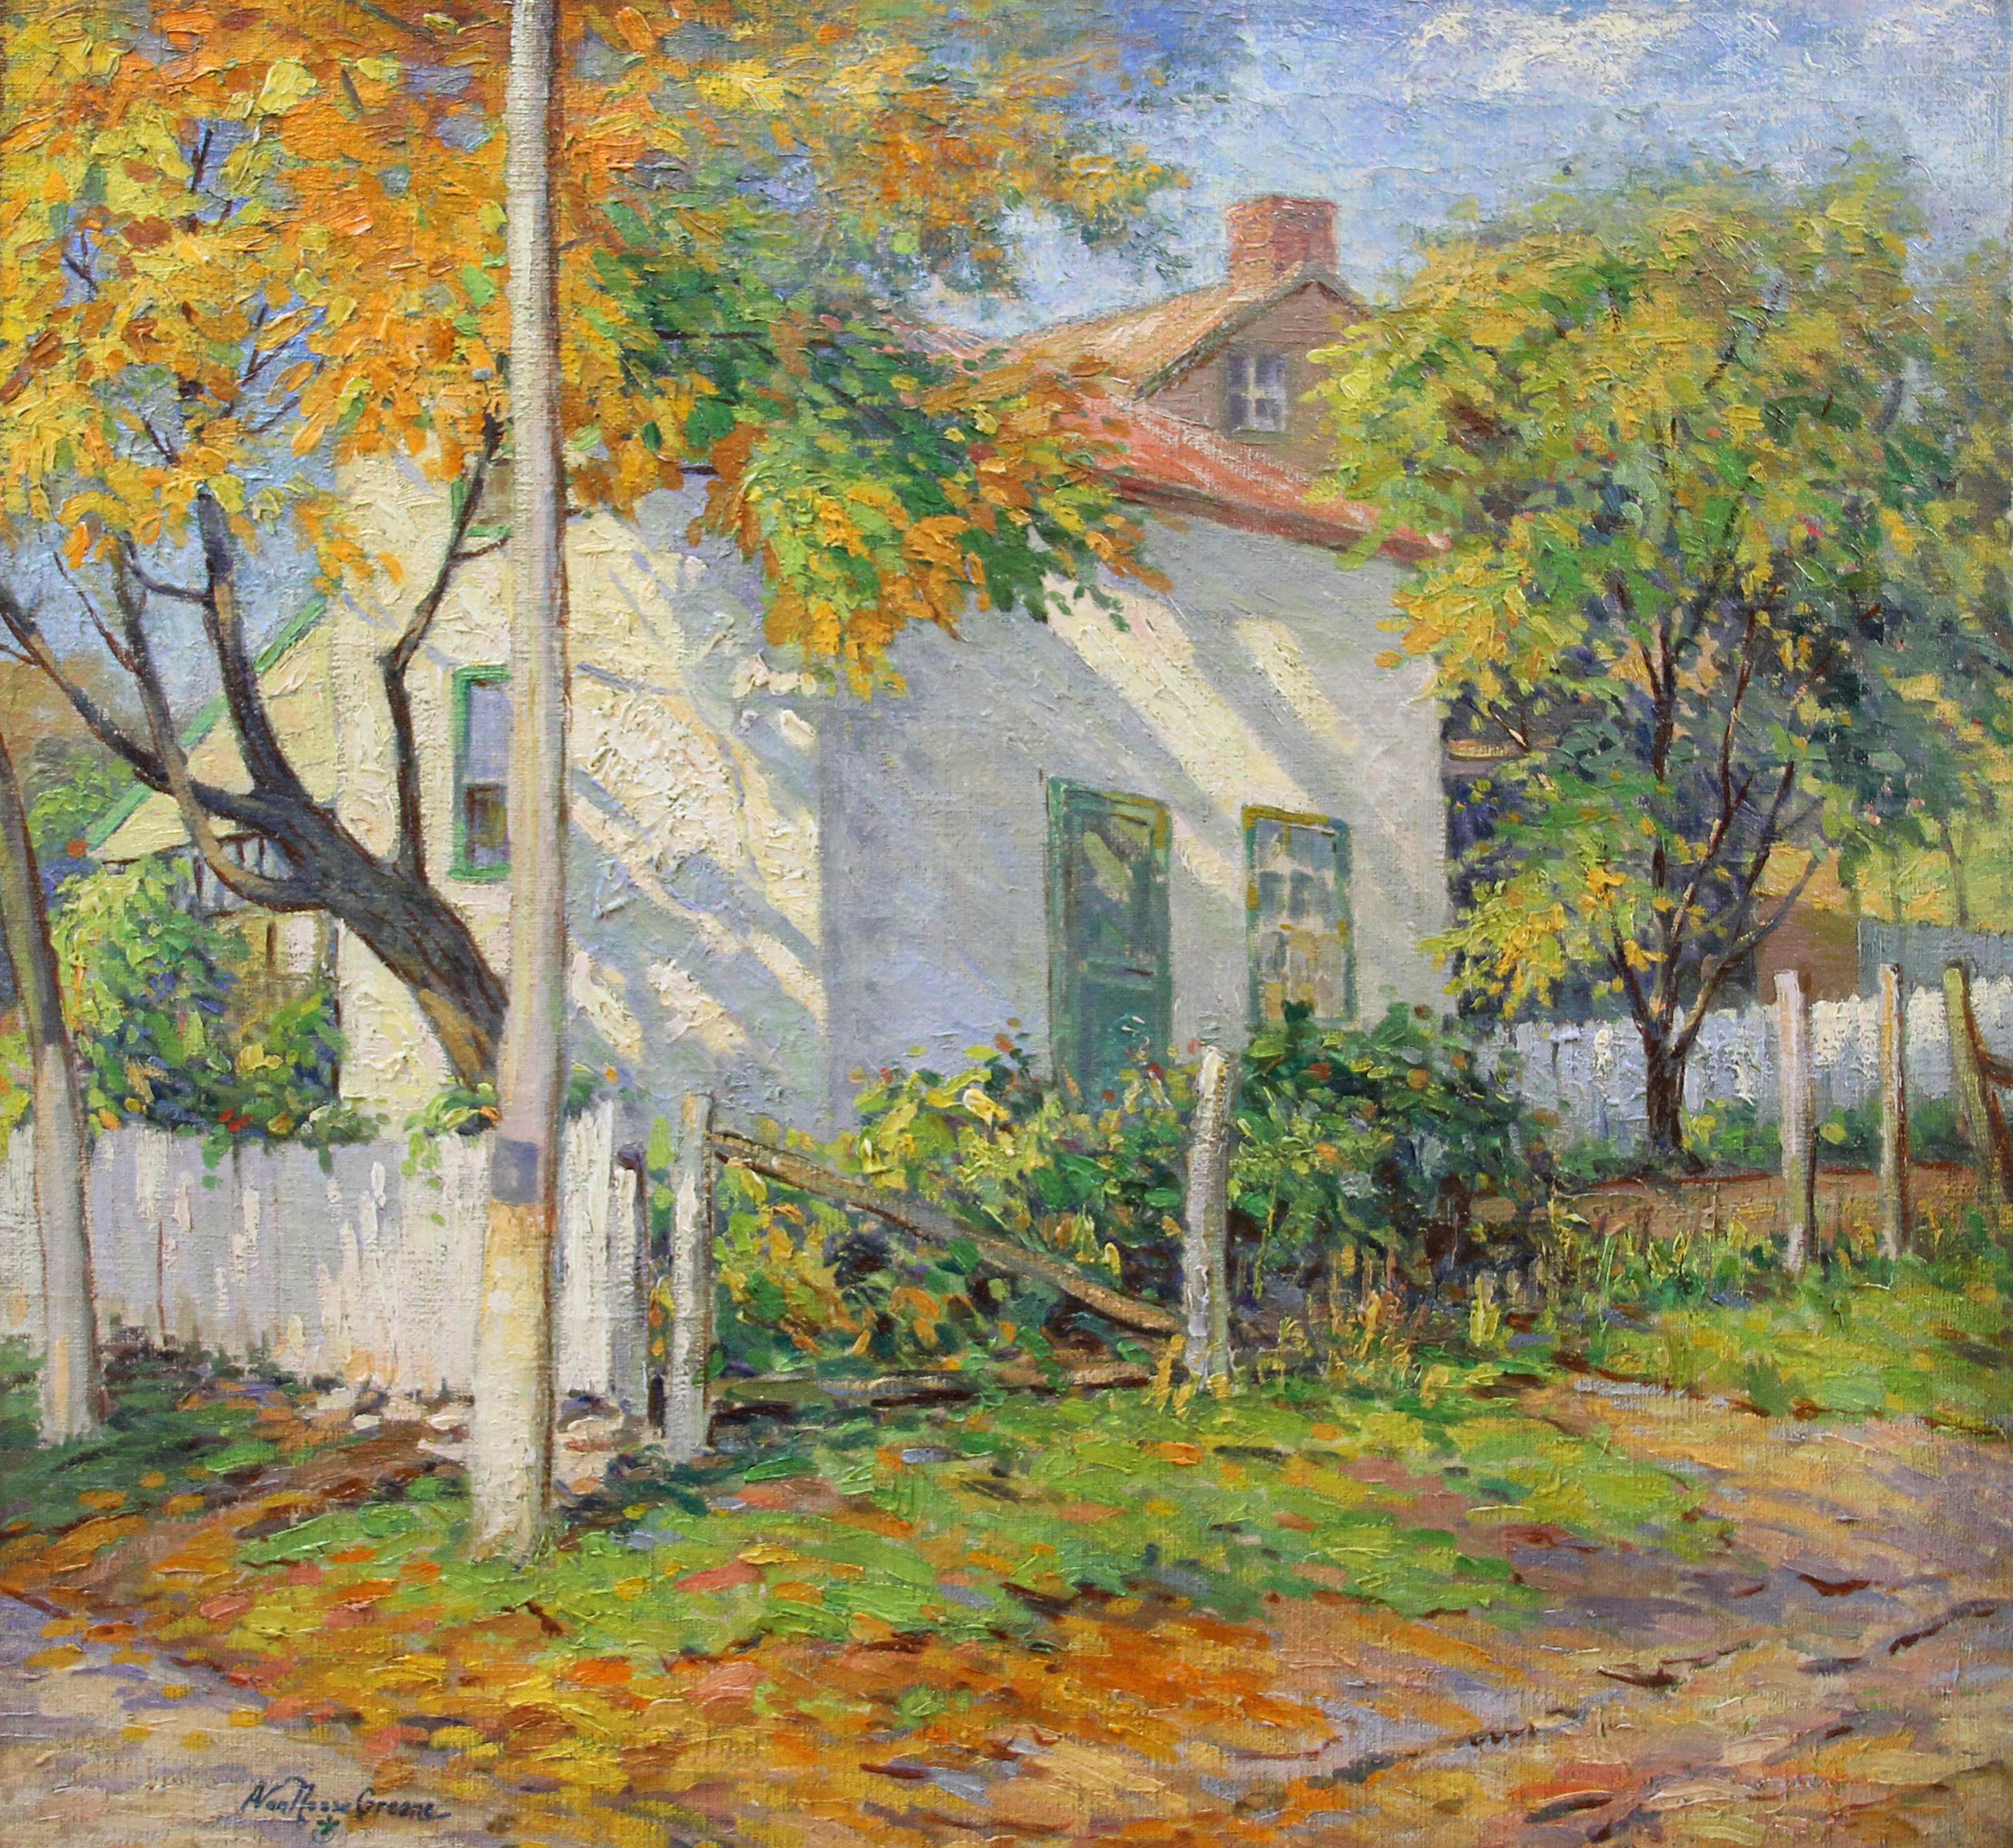 Sunlight and Shadow, White House, American Impressionist Landscape - Painting by Albert Van Nesse Greene